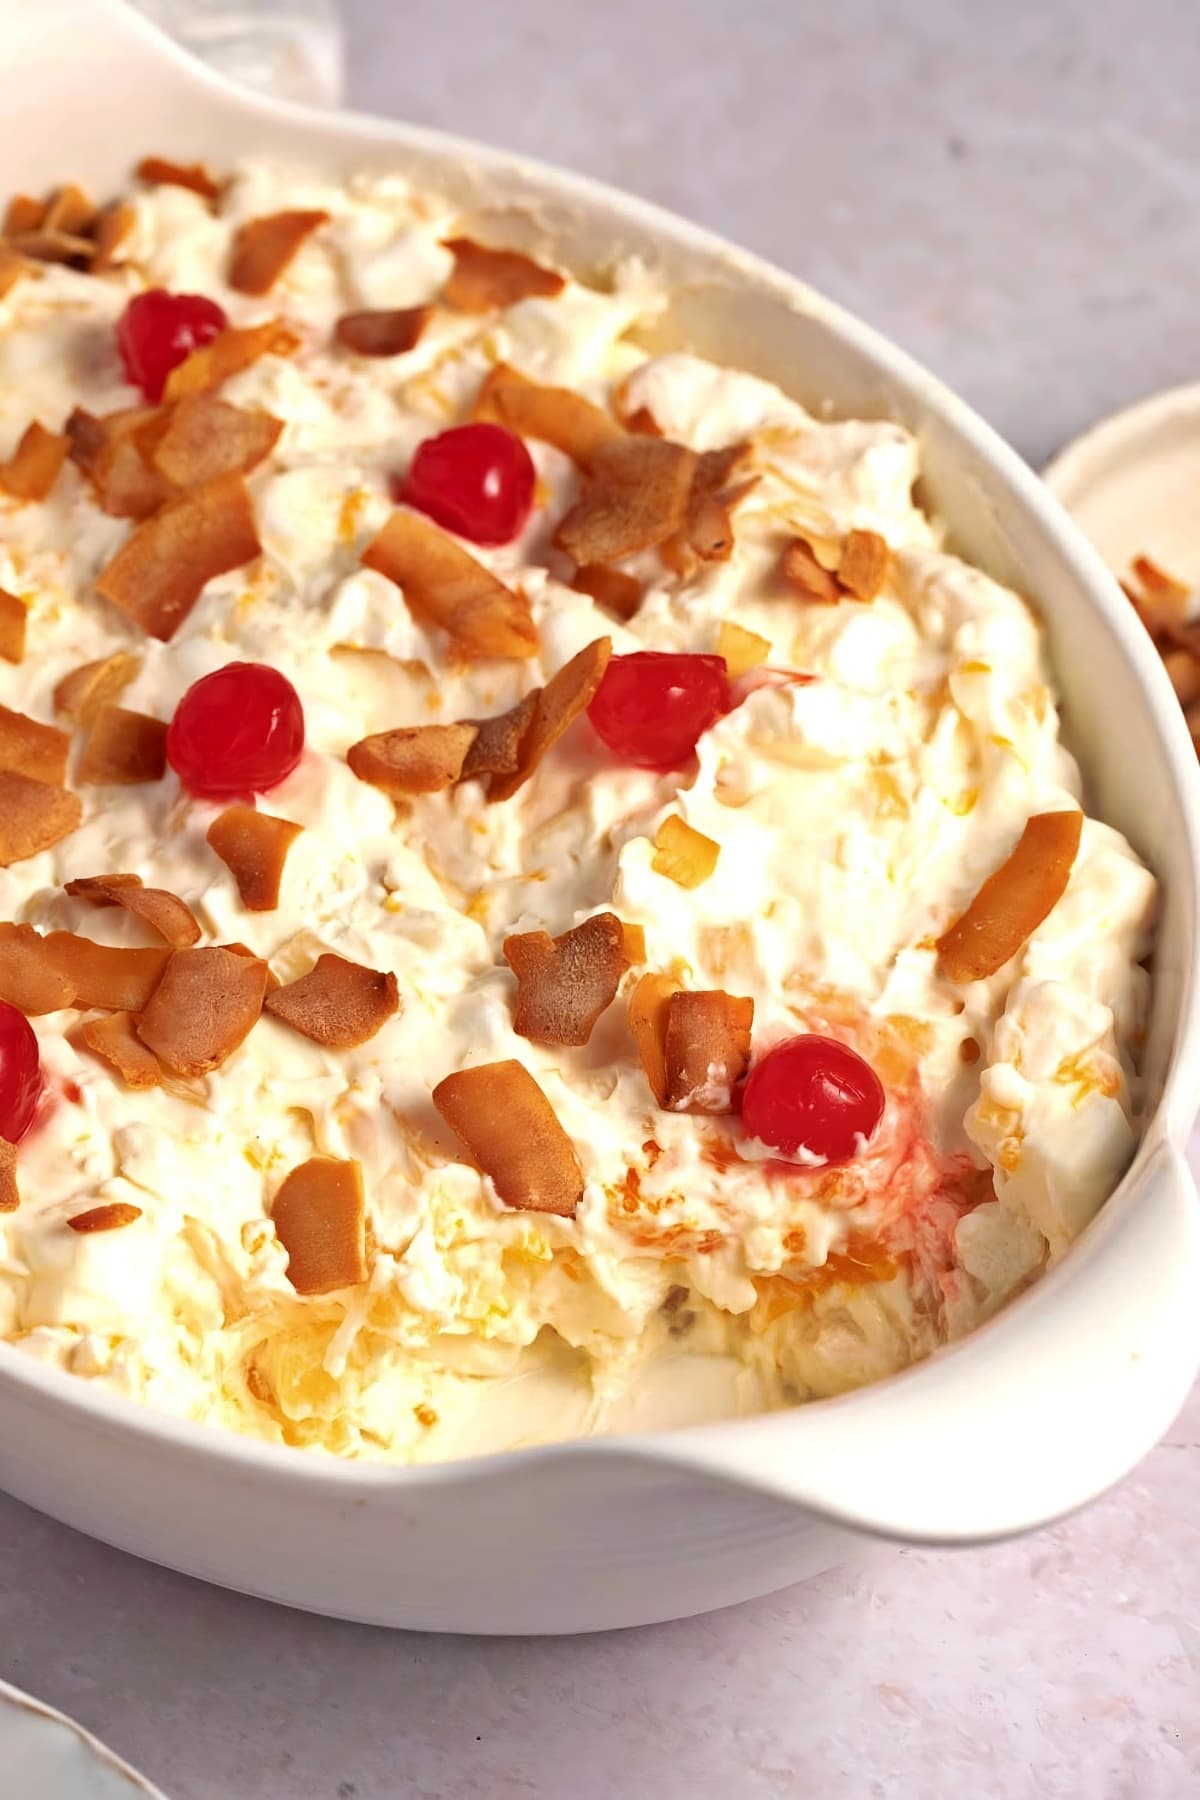 Homemade Pioneer Woman Ambrosia Salad with Cherries, Oranges and Mini-Marshmallows